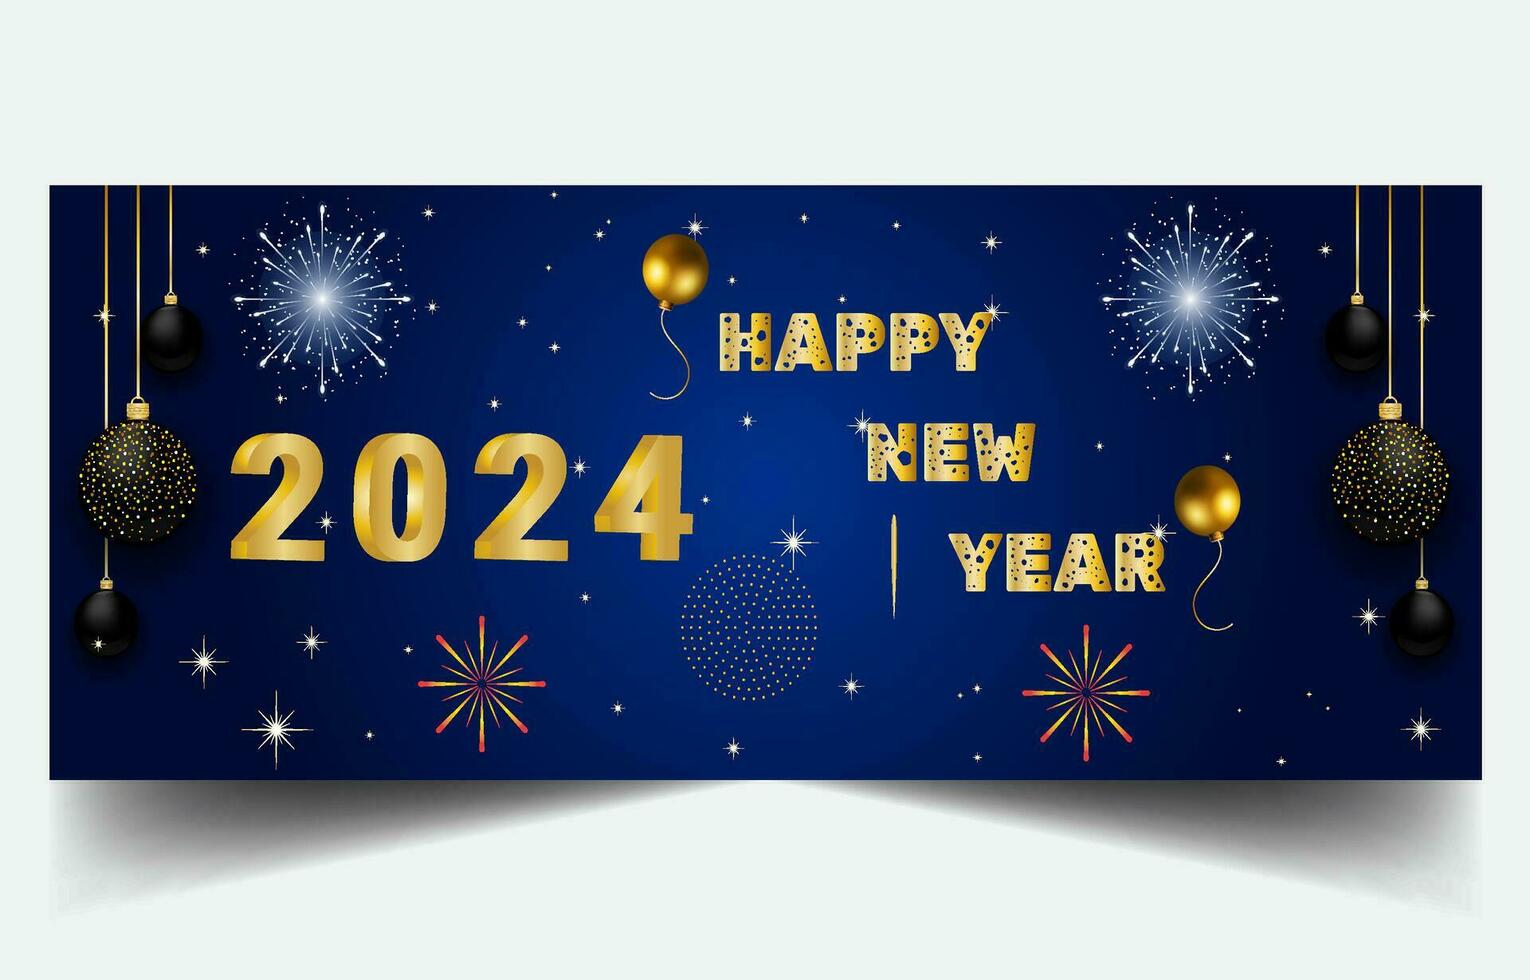 2024 new year celebration banner template design with colorful decoration background vector illustration.